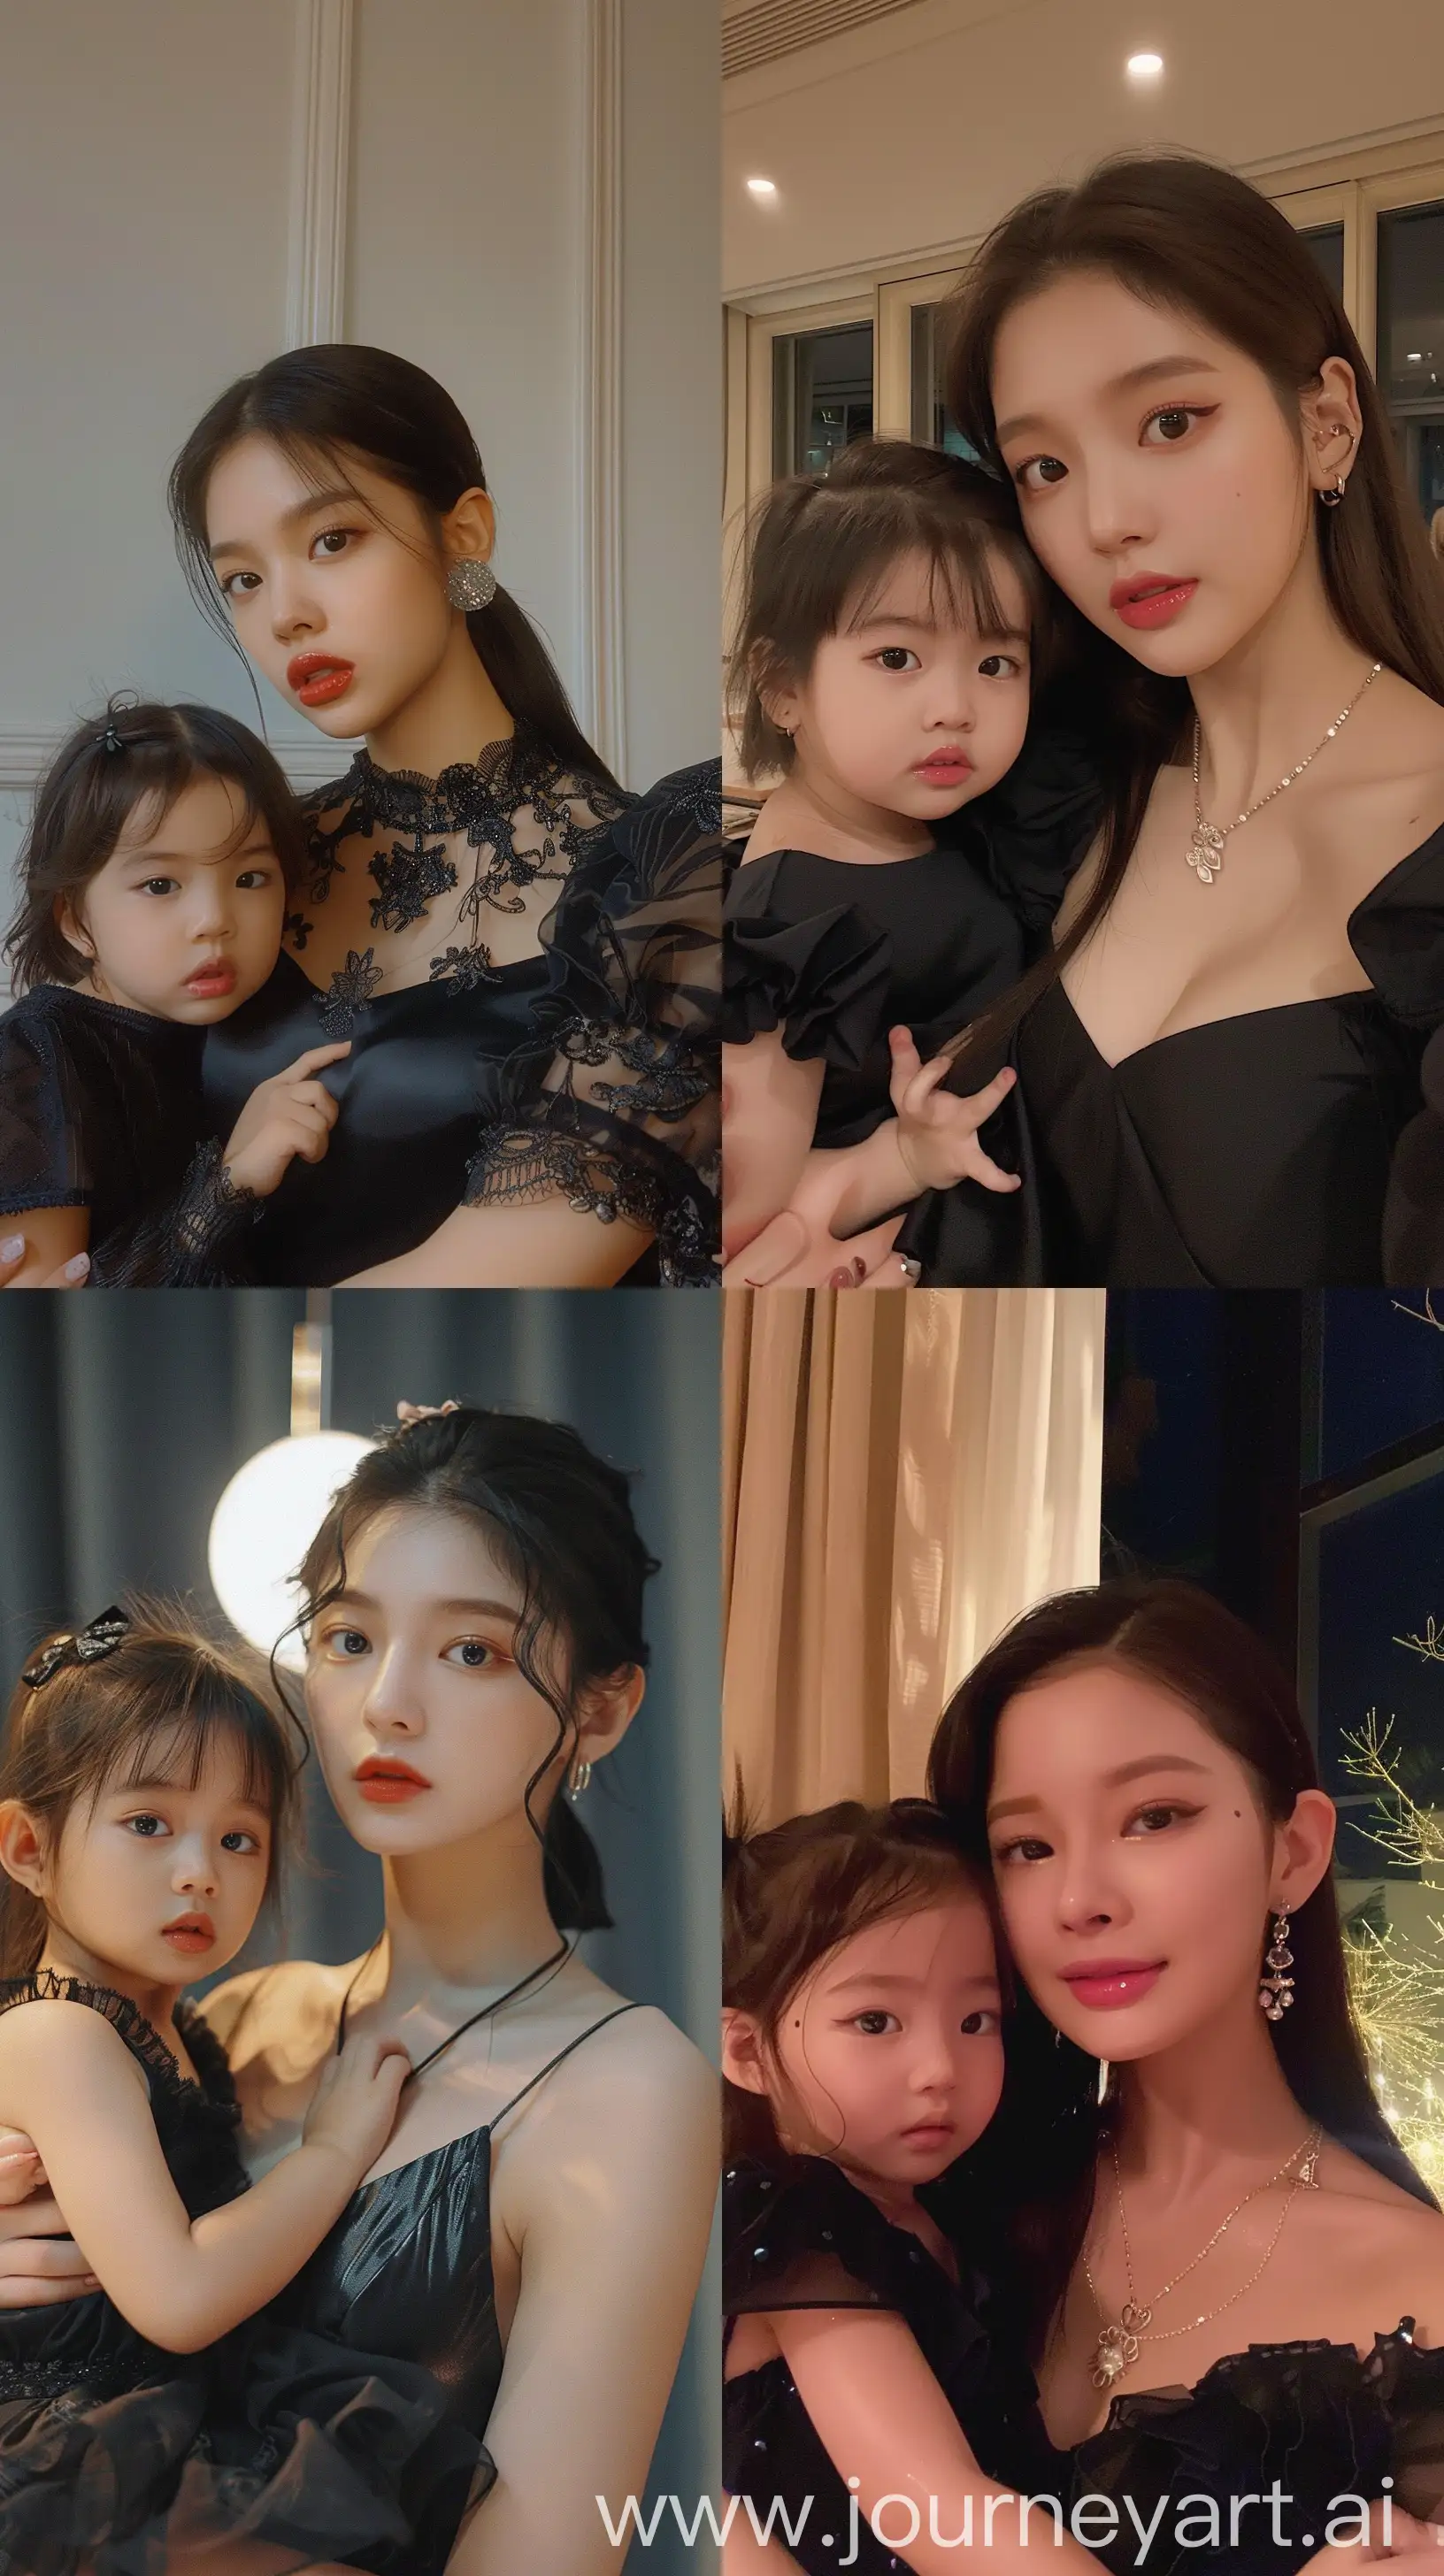 blackpink's jennie,holding 2 years old girl, facial feature look a like blackpink's jennie, aestethic selfie, night times, aestethic make up, wearing black elegant dress --ar 9:16